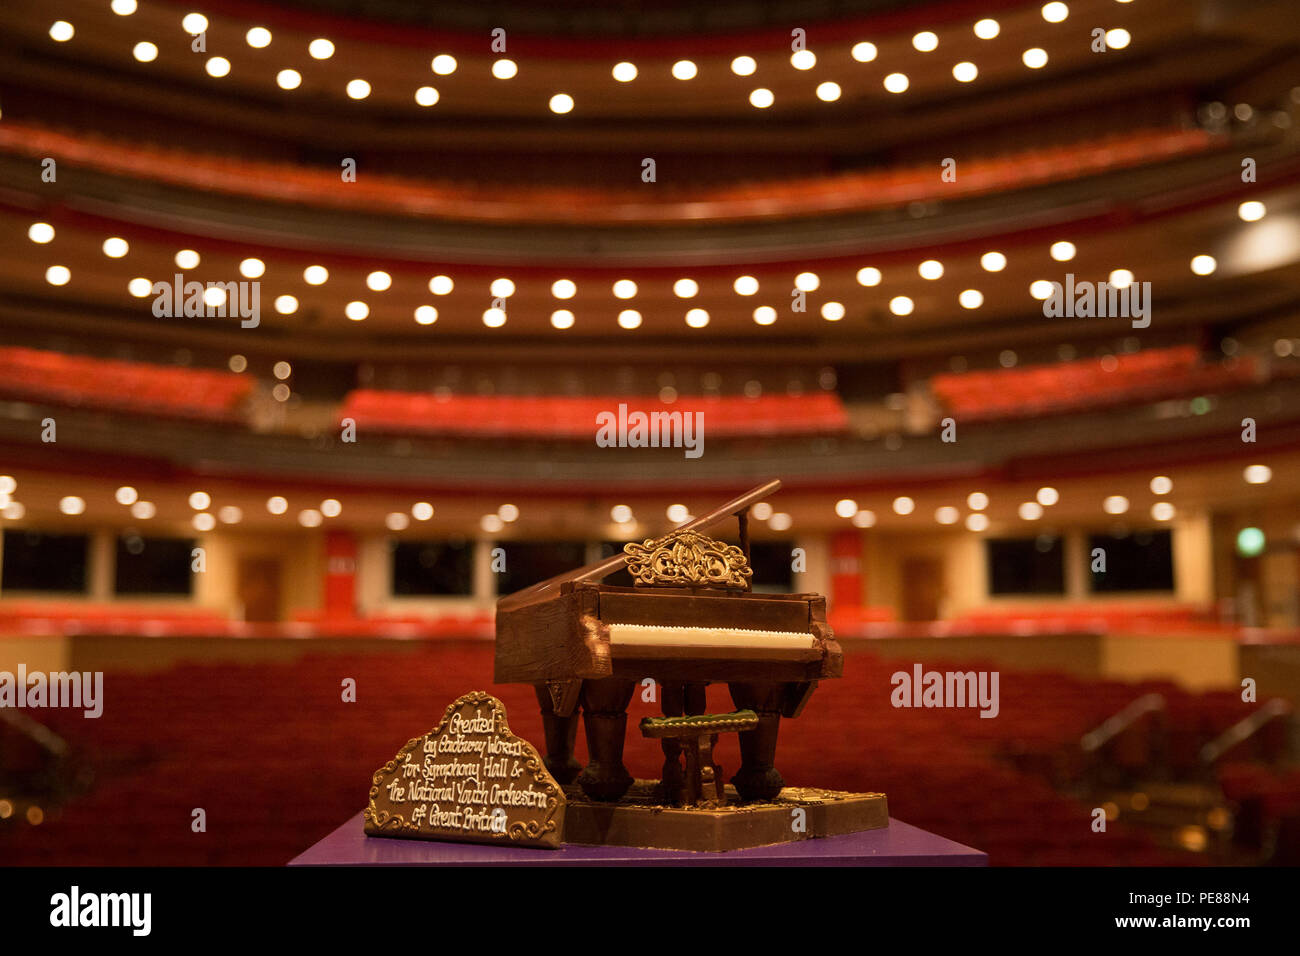 A Cadbury World chocolate grand piano on stage at Birmingham's Symphony Hall, Broad Street, Birmingham. The piano weighing 2kg and made from 44 standard bars of Dairy Milk was a gift to Symphony Hall and the National Youth Orchestra of Great Britain. Stock Photo